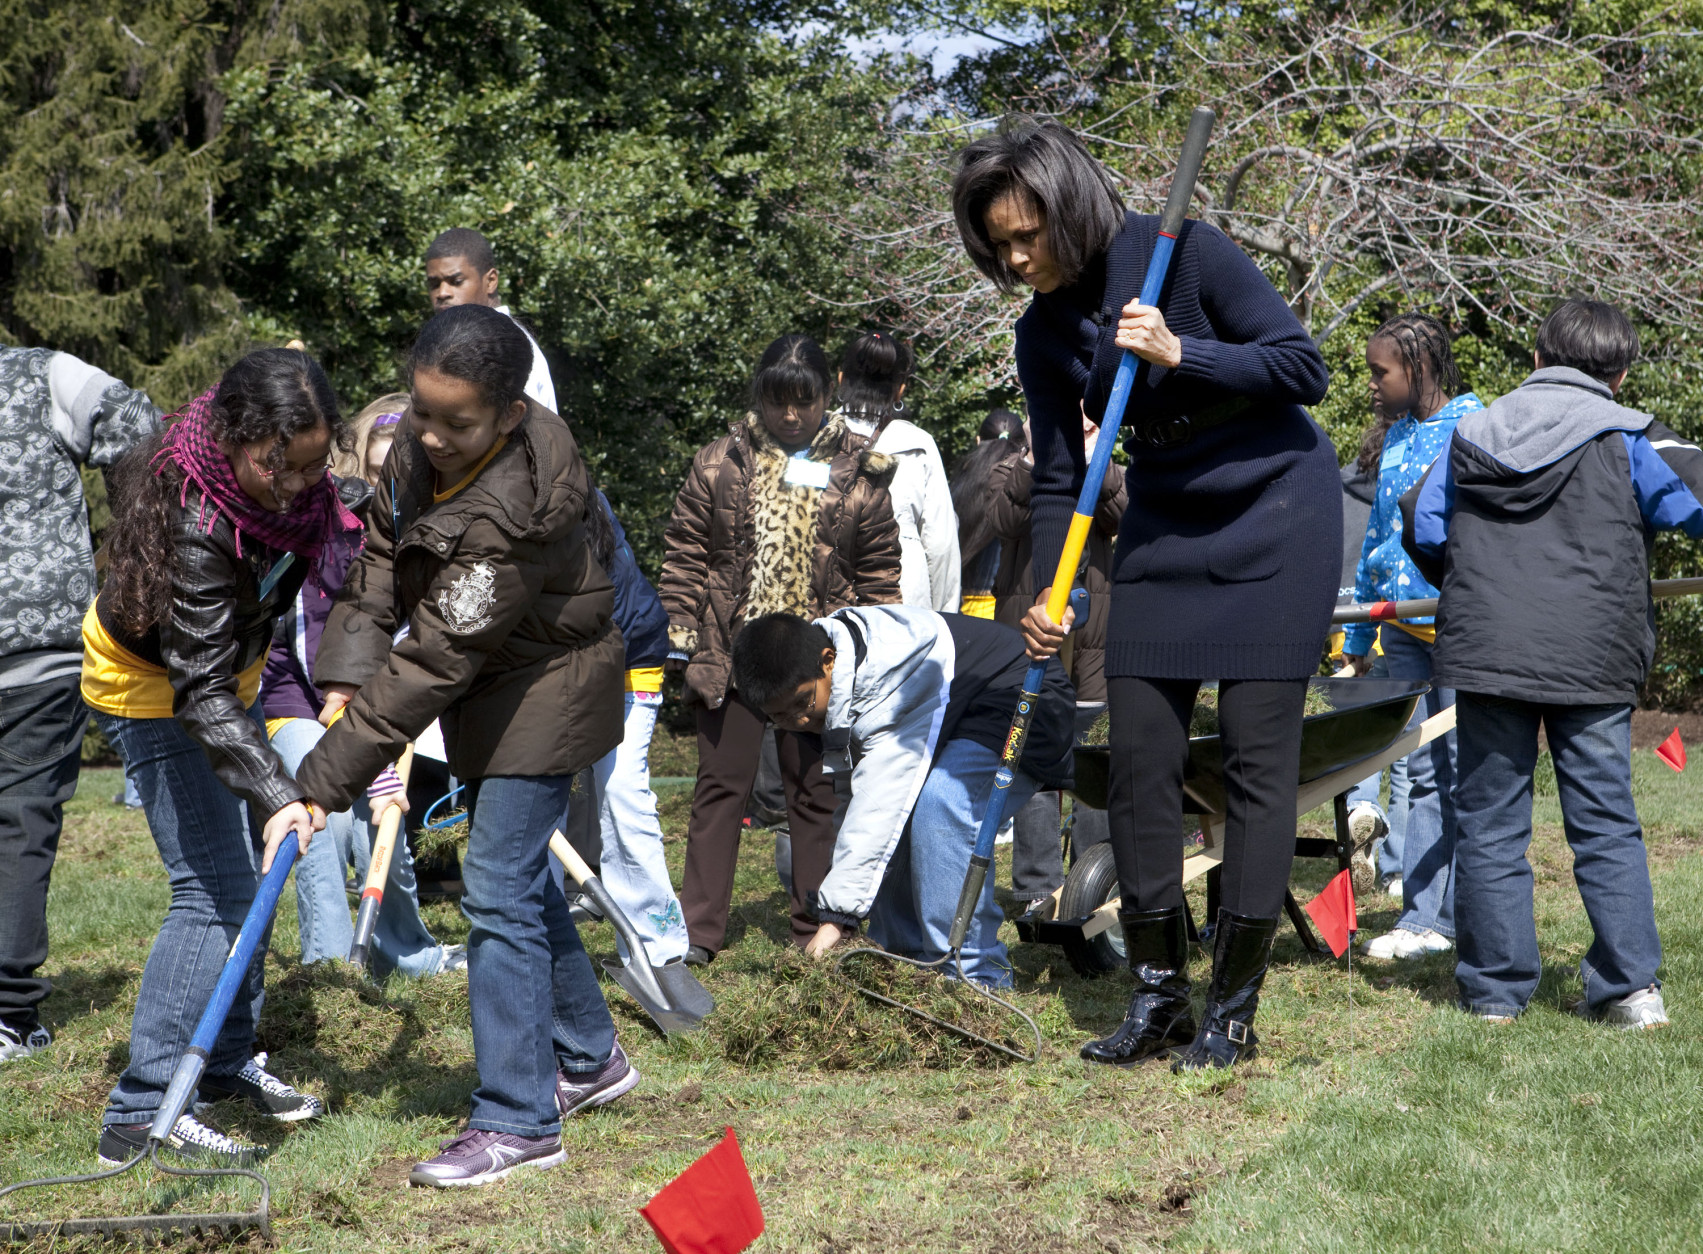 First lady Michelle Obama takes part in groundbreaking of the White House Kitchen Garden on the South Lawn of the White House of the White House in Washington, Friday, March 20, 2009, with students from Washington's Bancroft Elementary School. (AP Photo/Ron Edmonds)